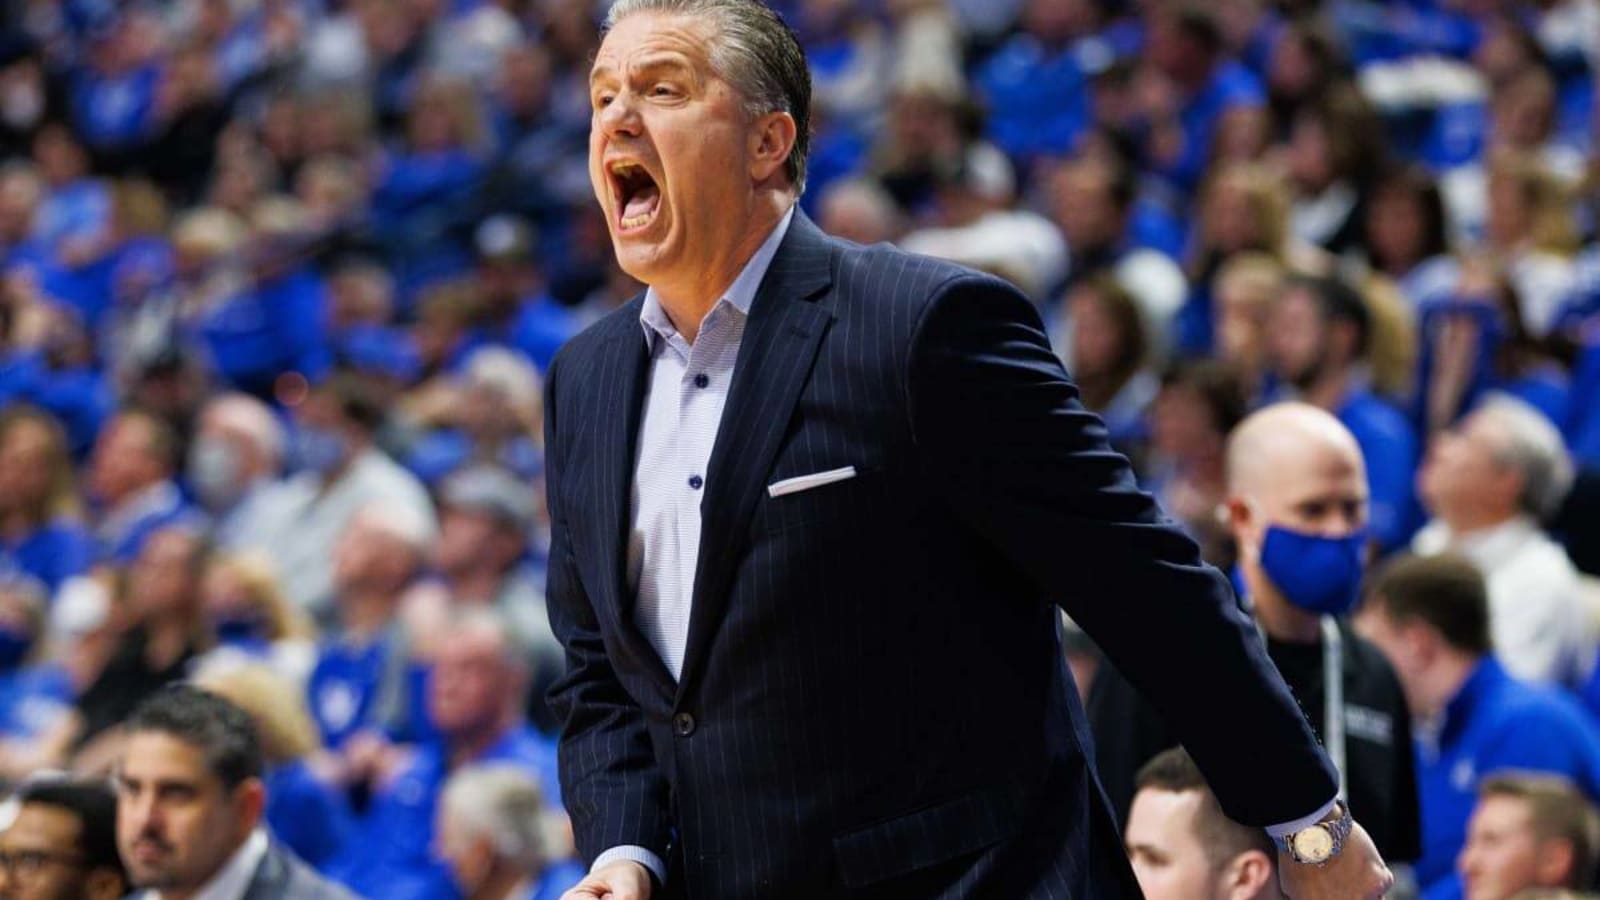 On3 lists Kentucky basketball as one of ten teams that can win the National Championship